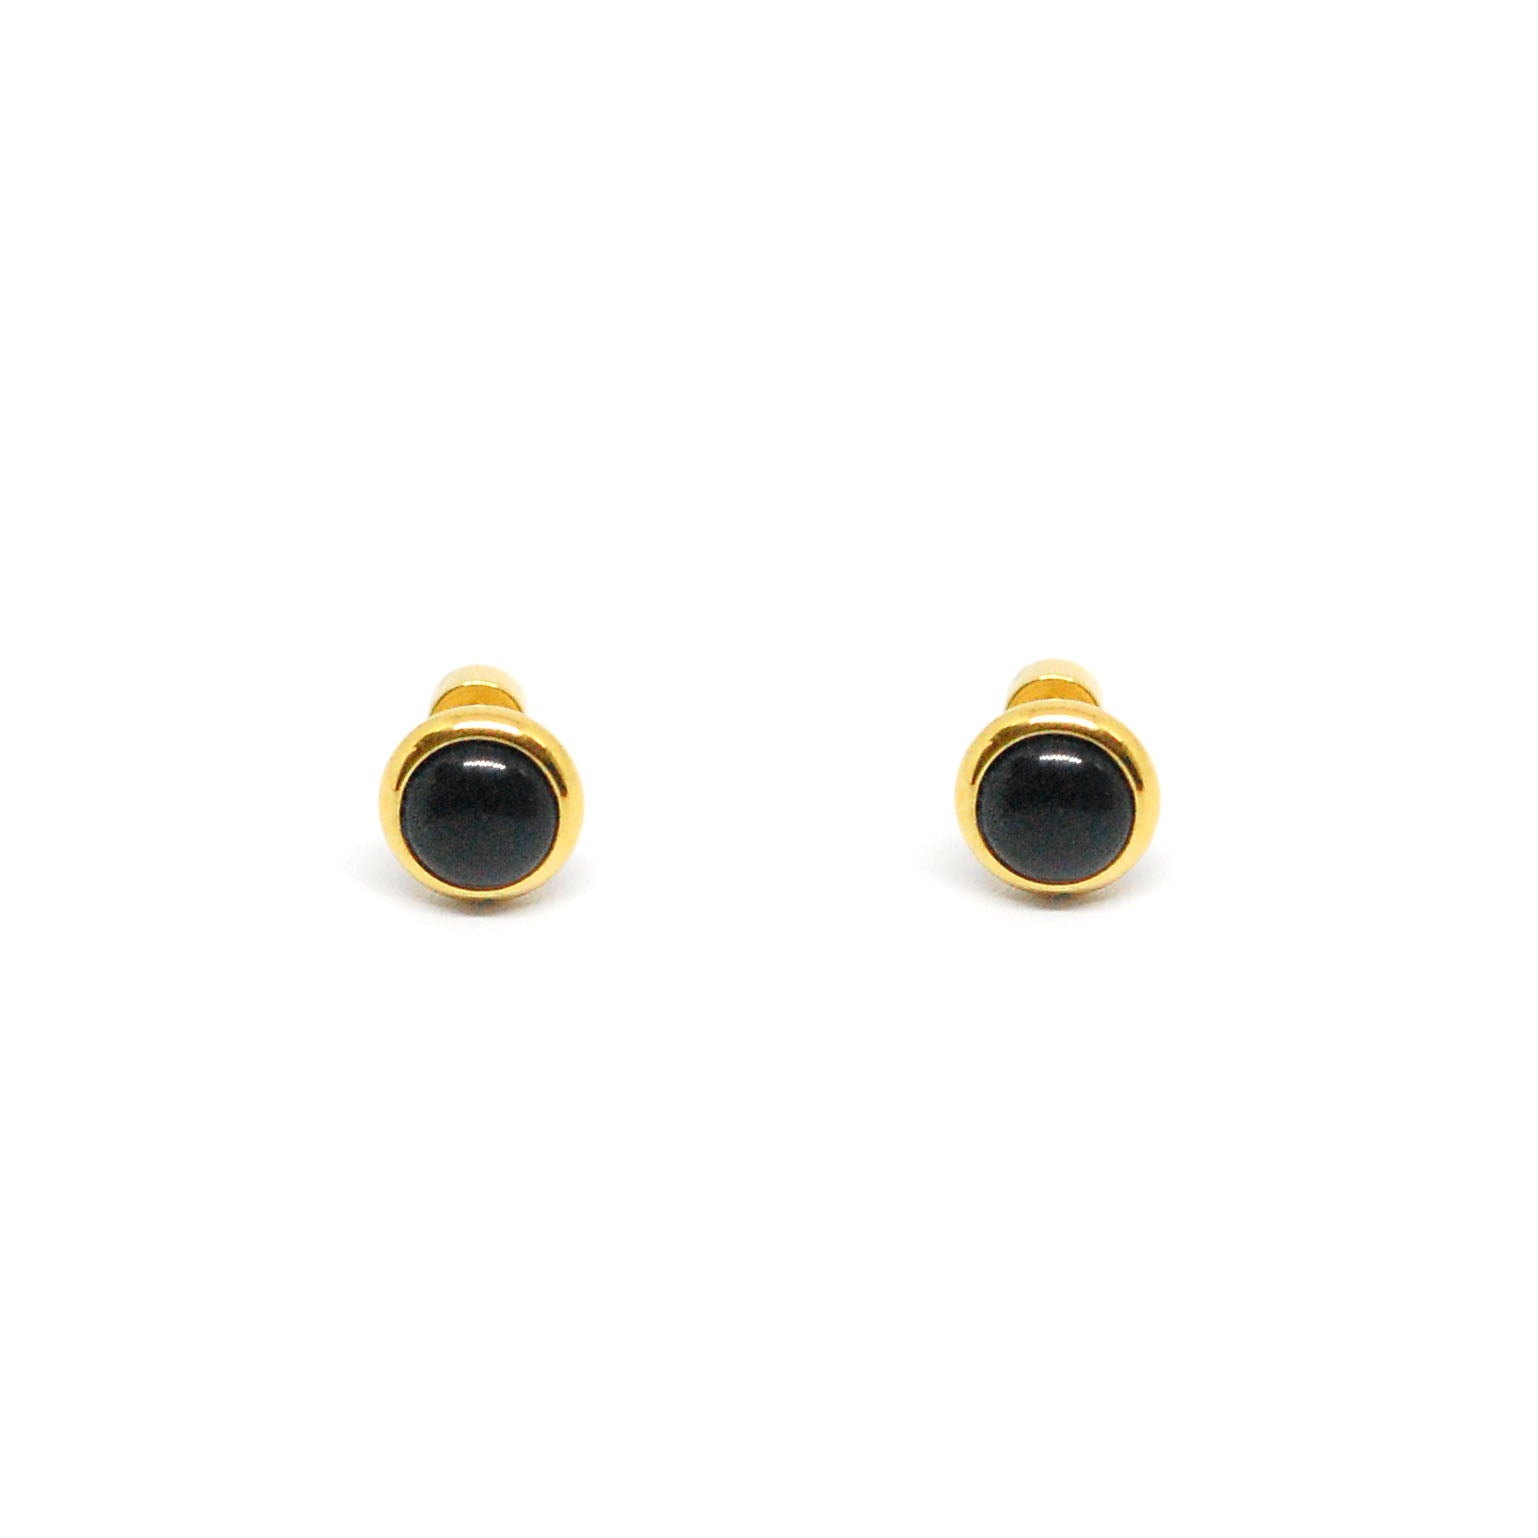 ESE 8079: All IPG Enclosed 6mm Speial Stone Studs w/ Baby Safe Chapita